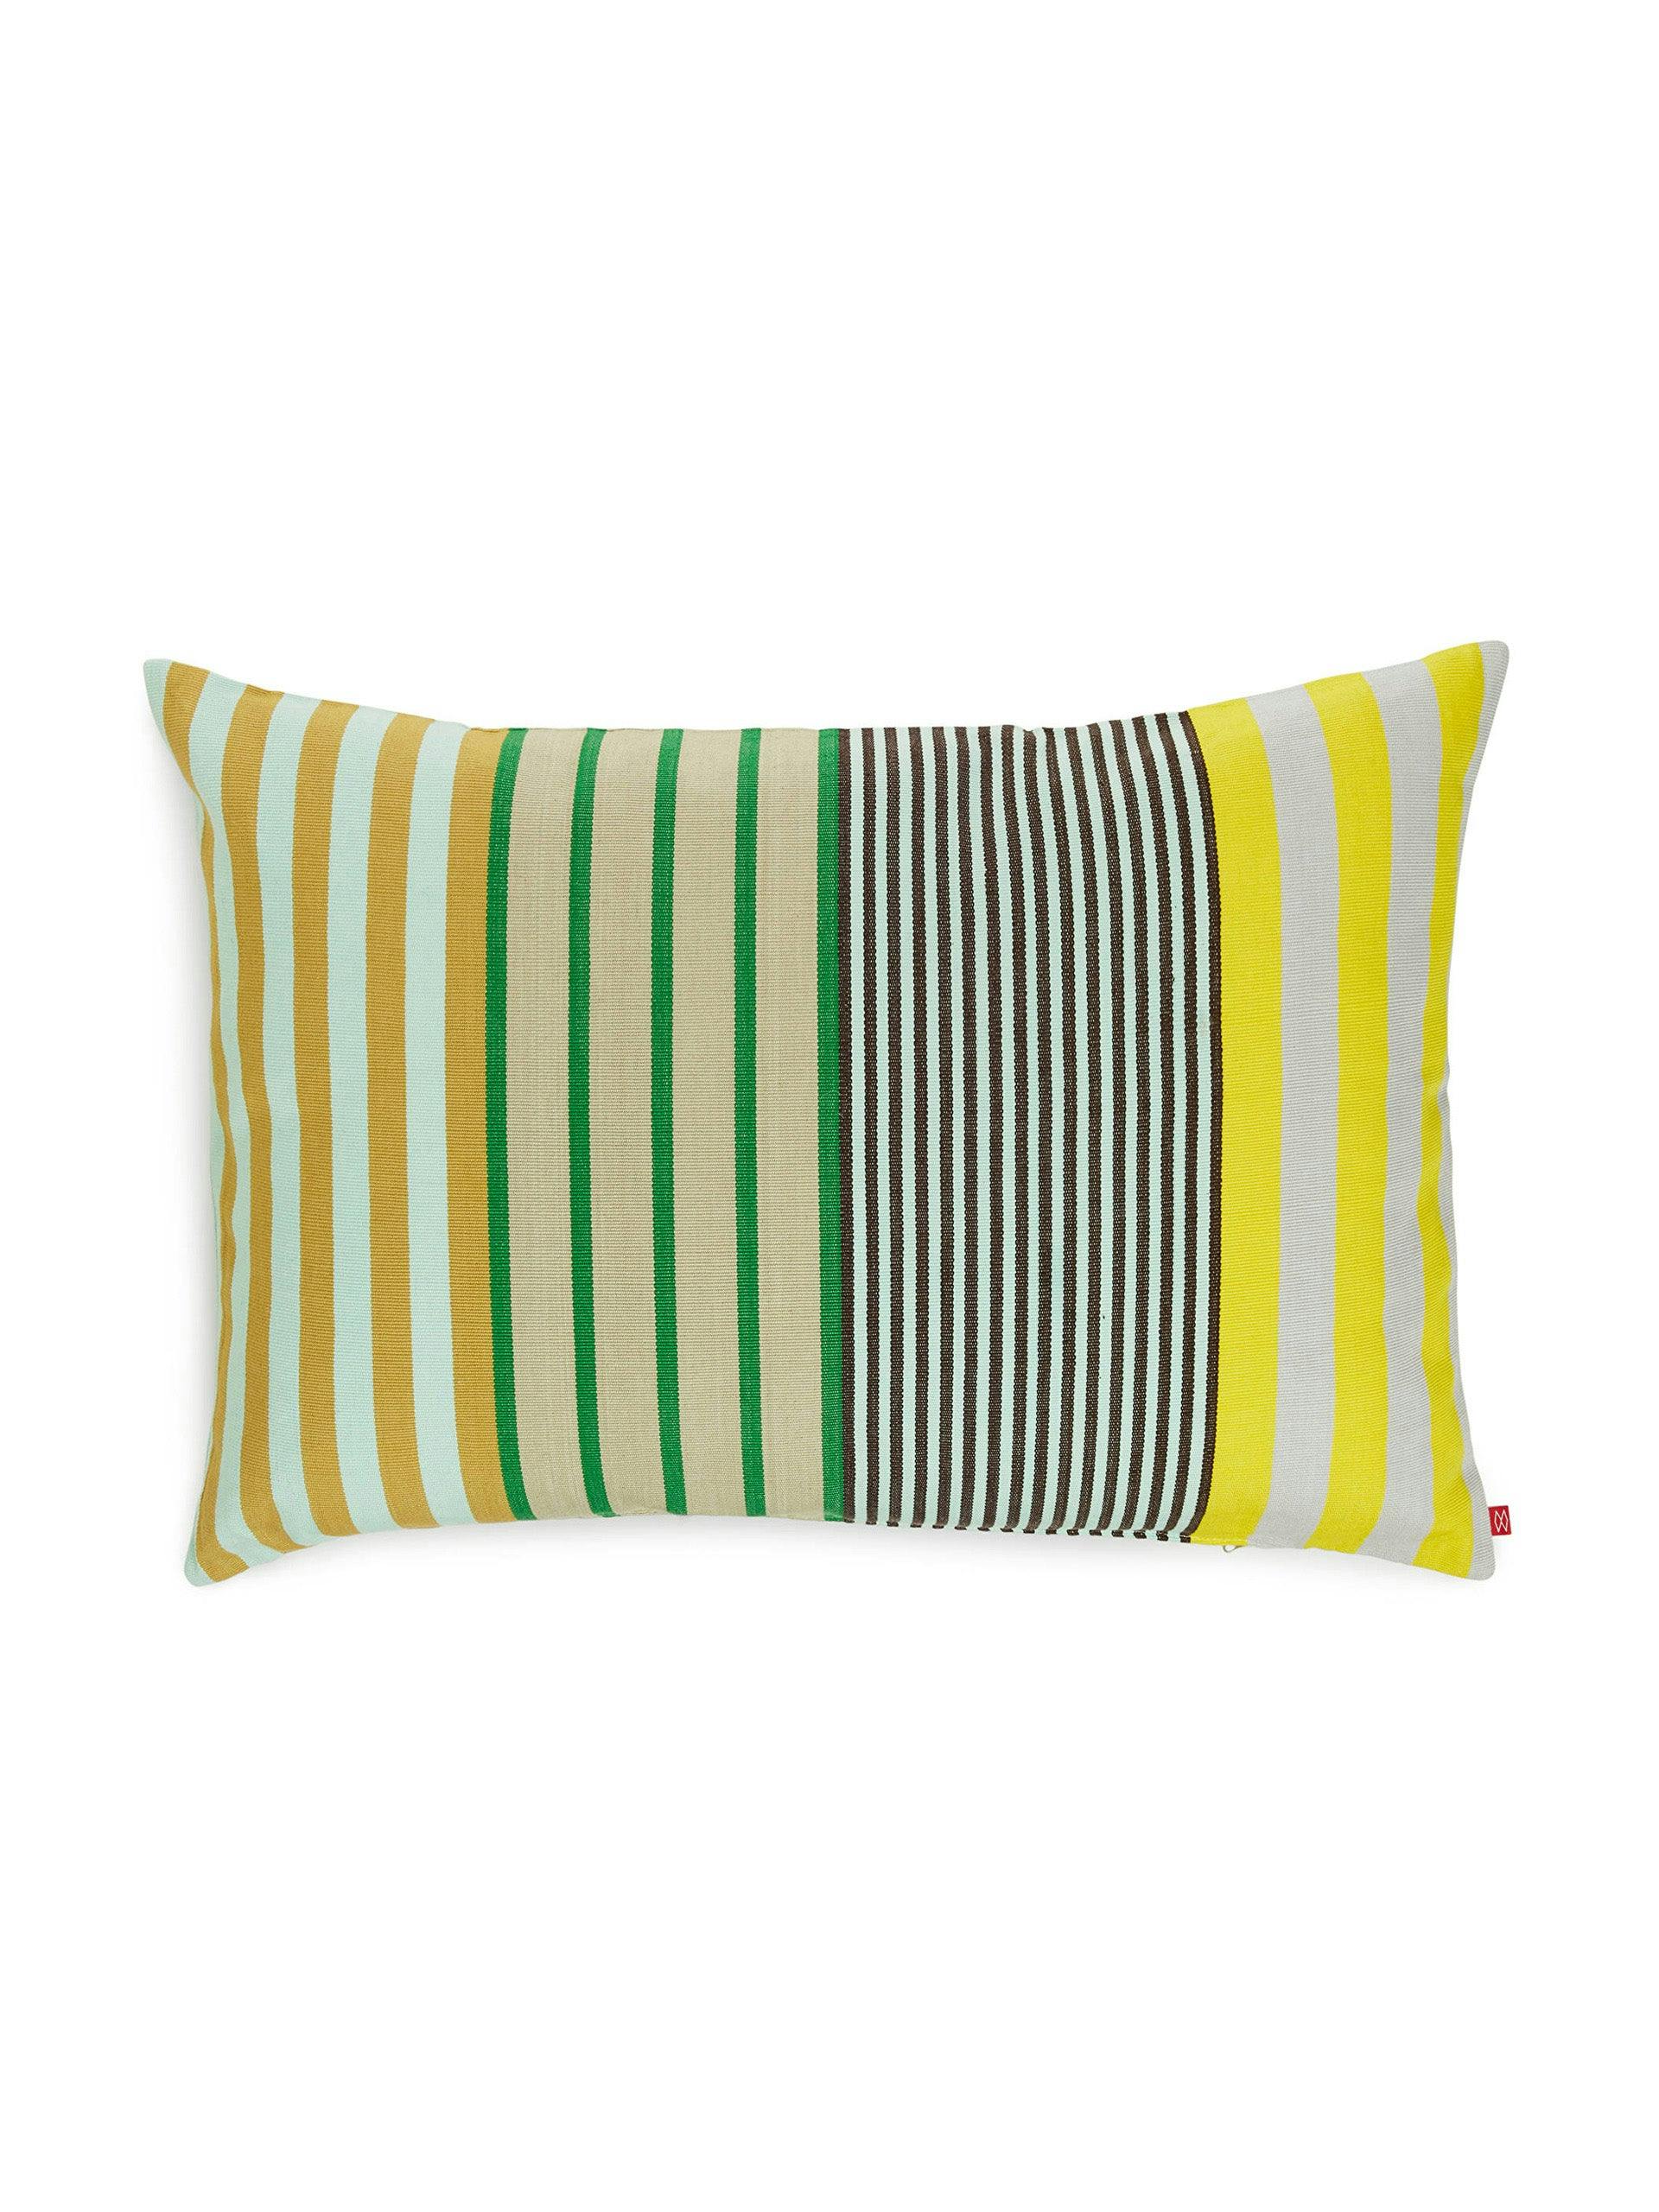 Handwoven striped cushion cover